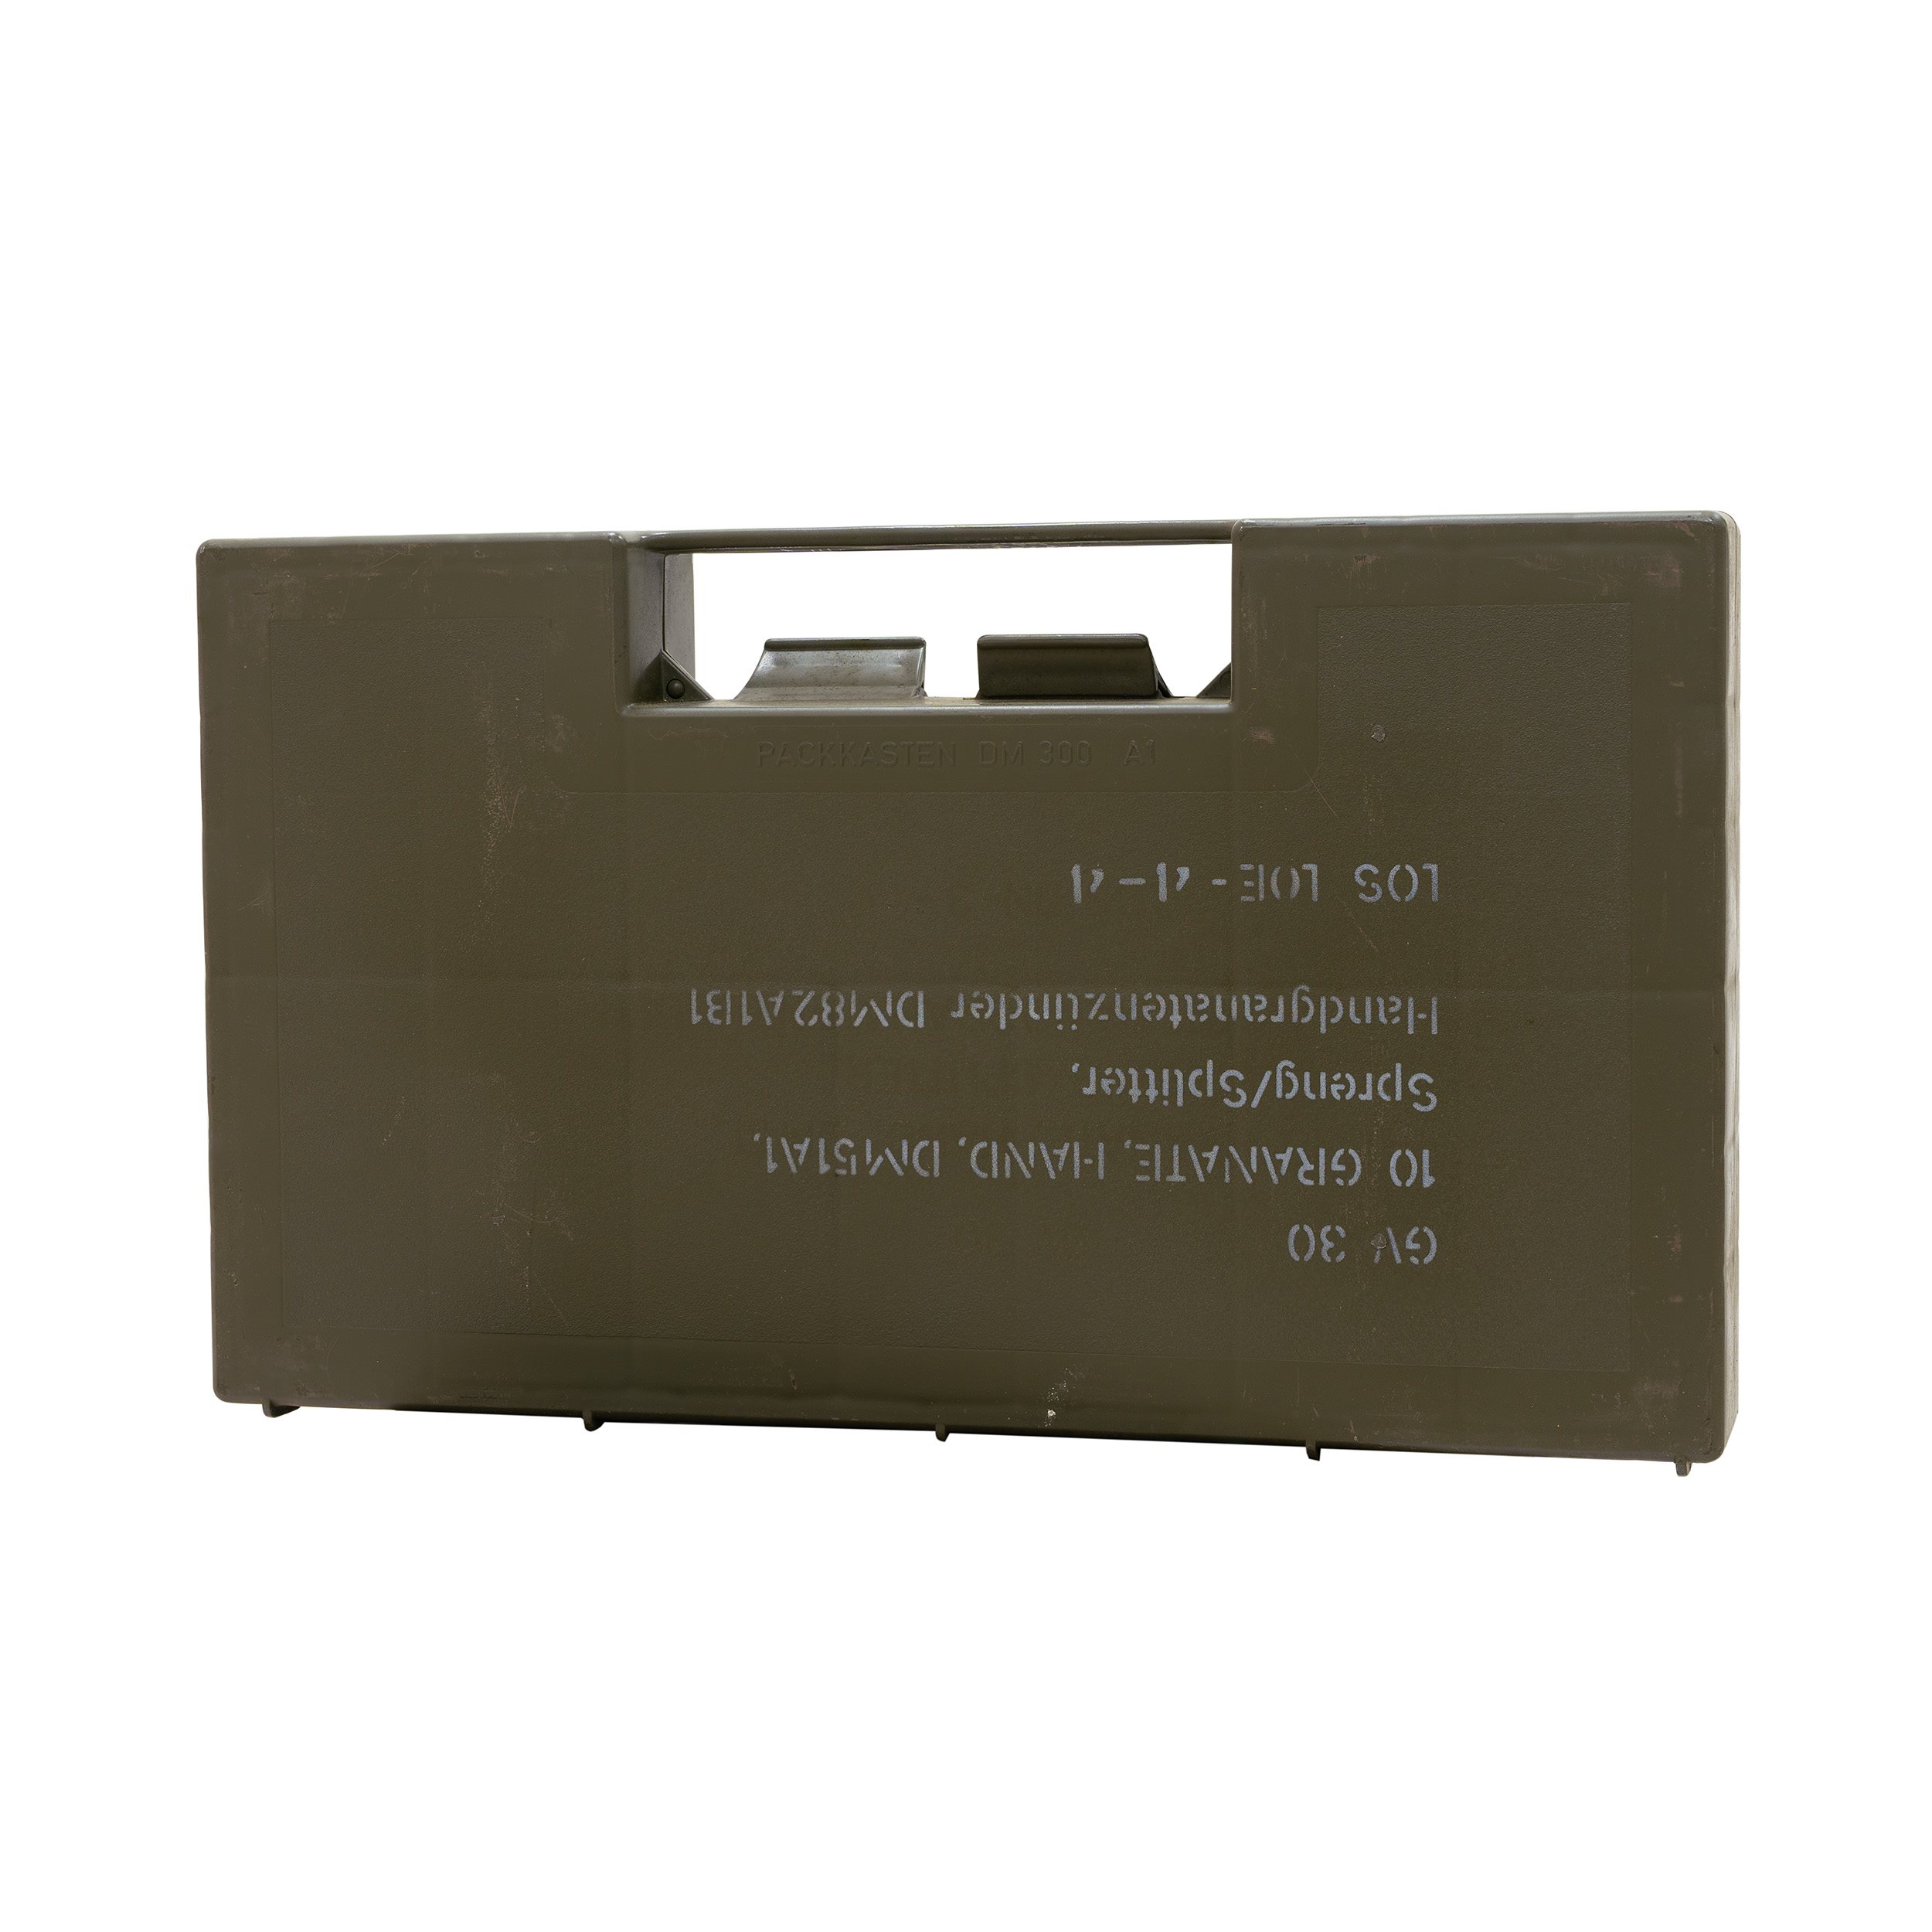 Crate/box for transporting GV 30 grenades plastic GREEN Bundeswehr DM300A1 L-11